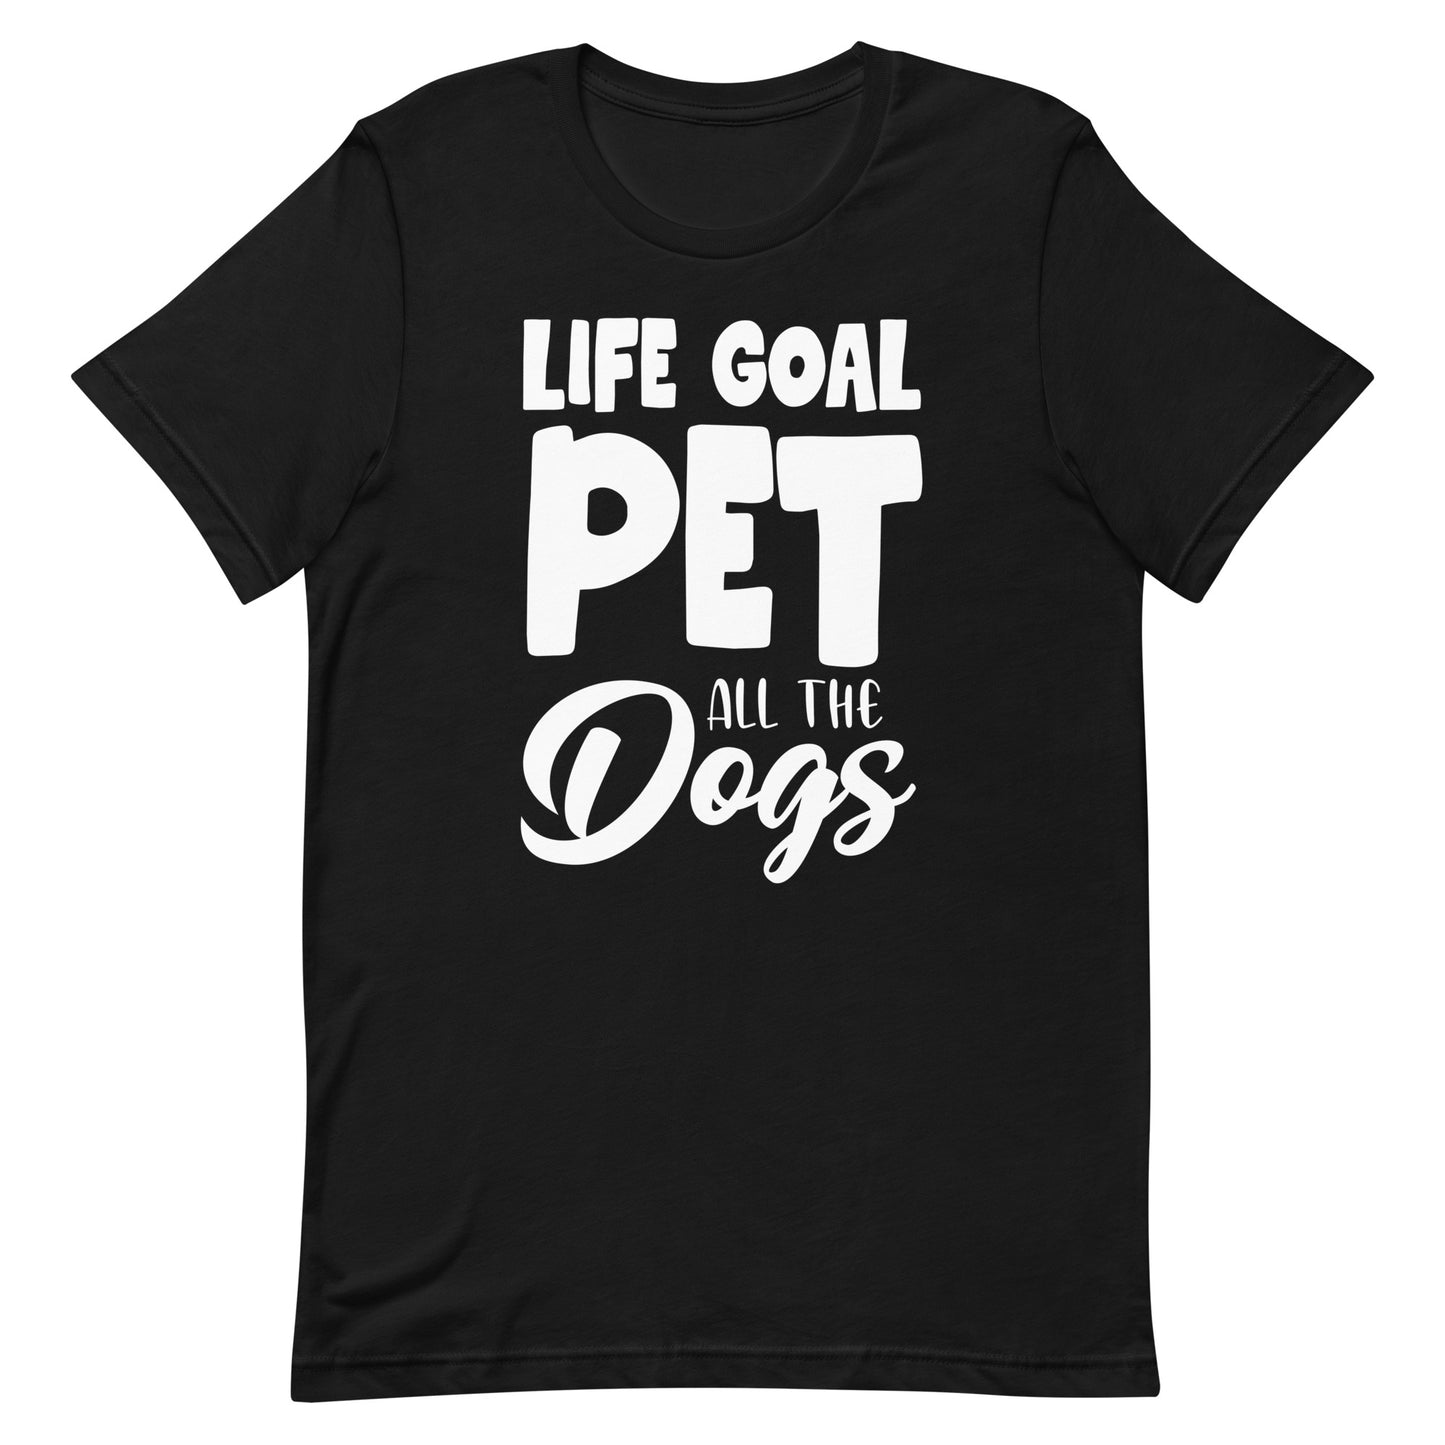 Life Goal Pet all The Dogs T-Shirt